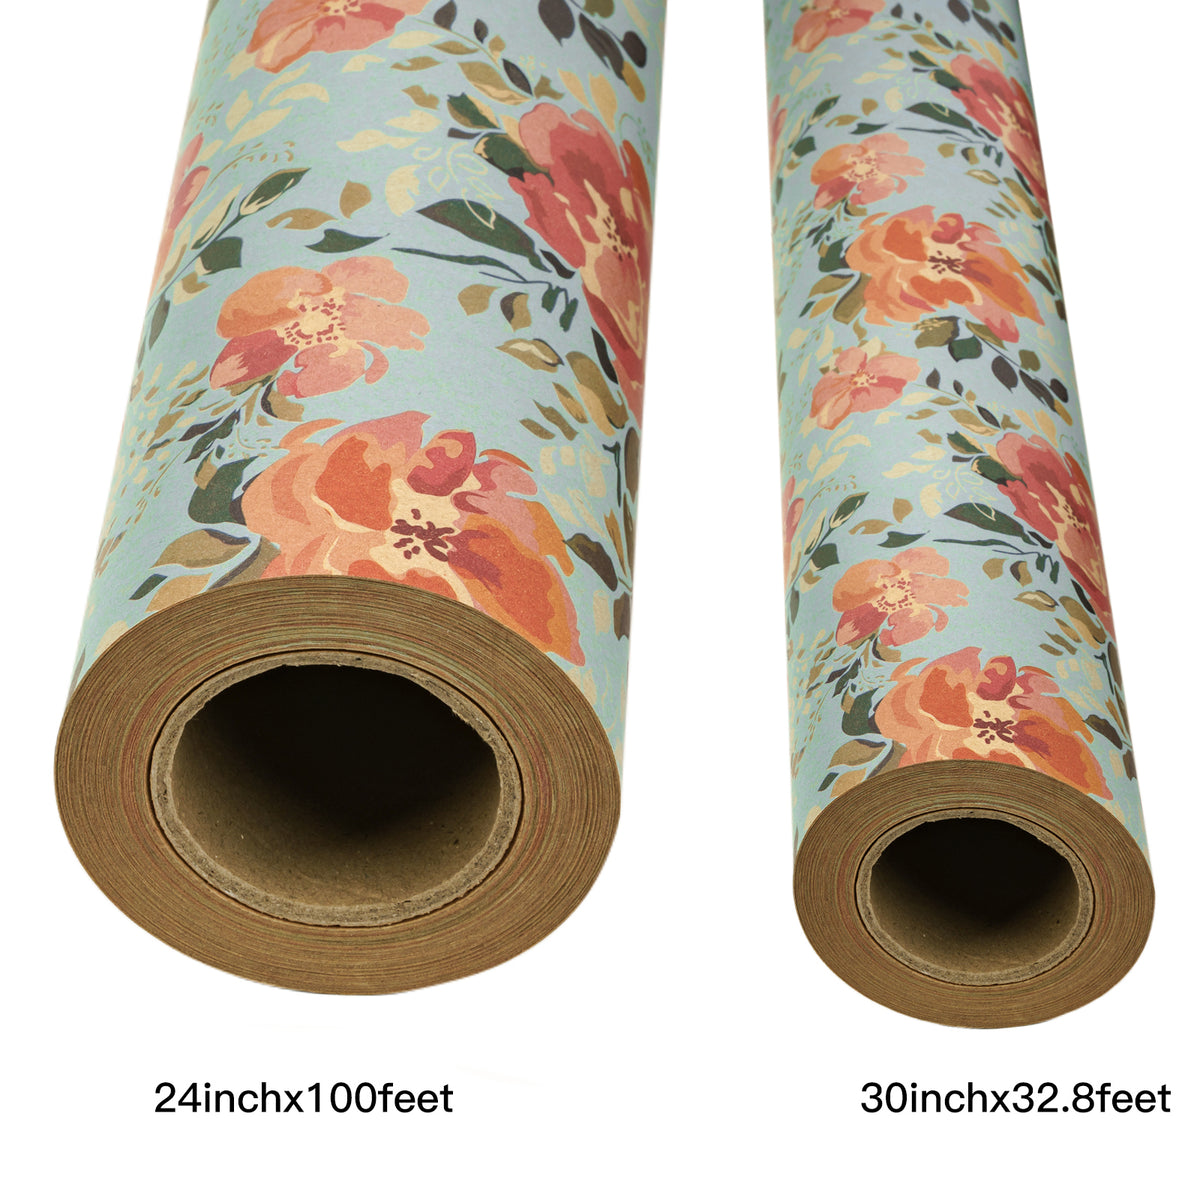 Vintage Non-woven Floral Wrapping Paper Roll (48cmx4Yd)